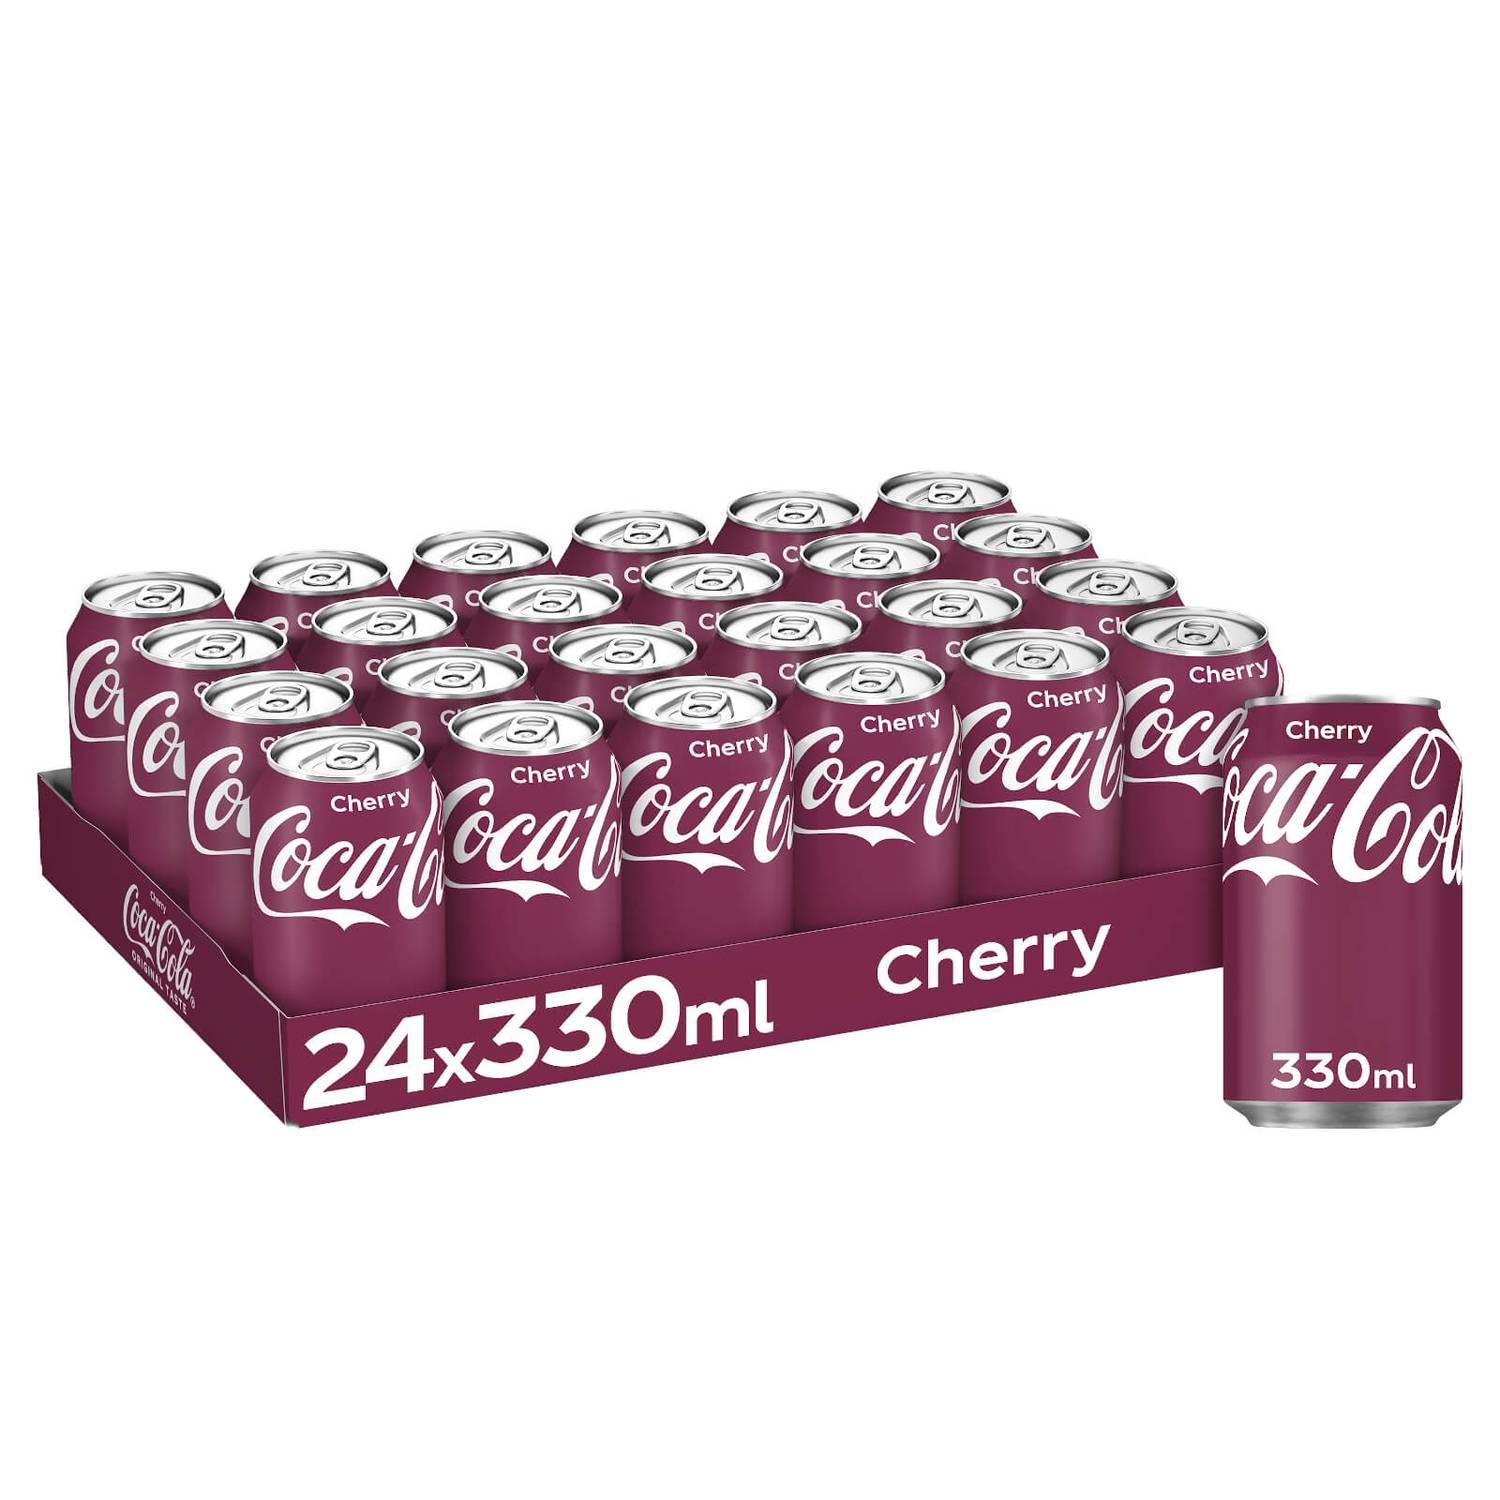 Cherry Coke Cans (Coca Cola) 24x330ml Cans - Vending Superstore